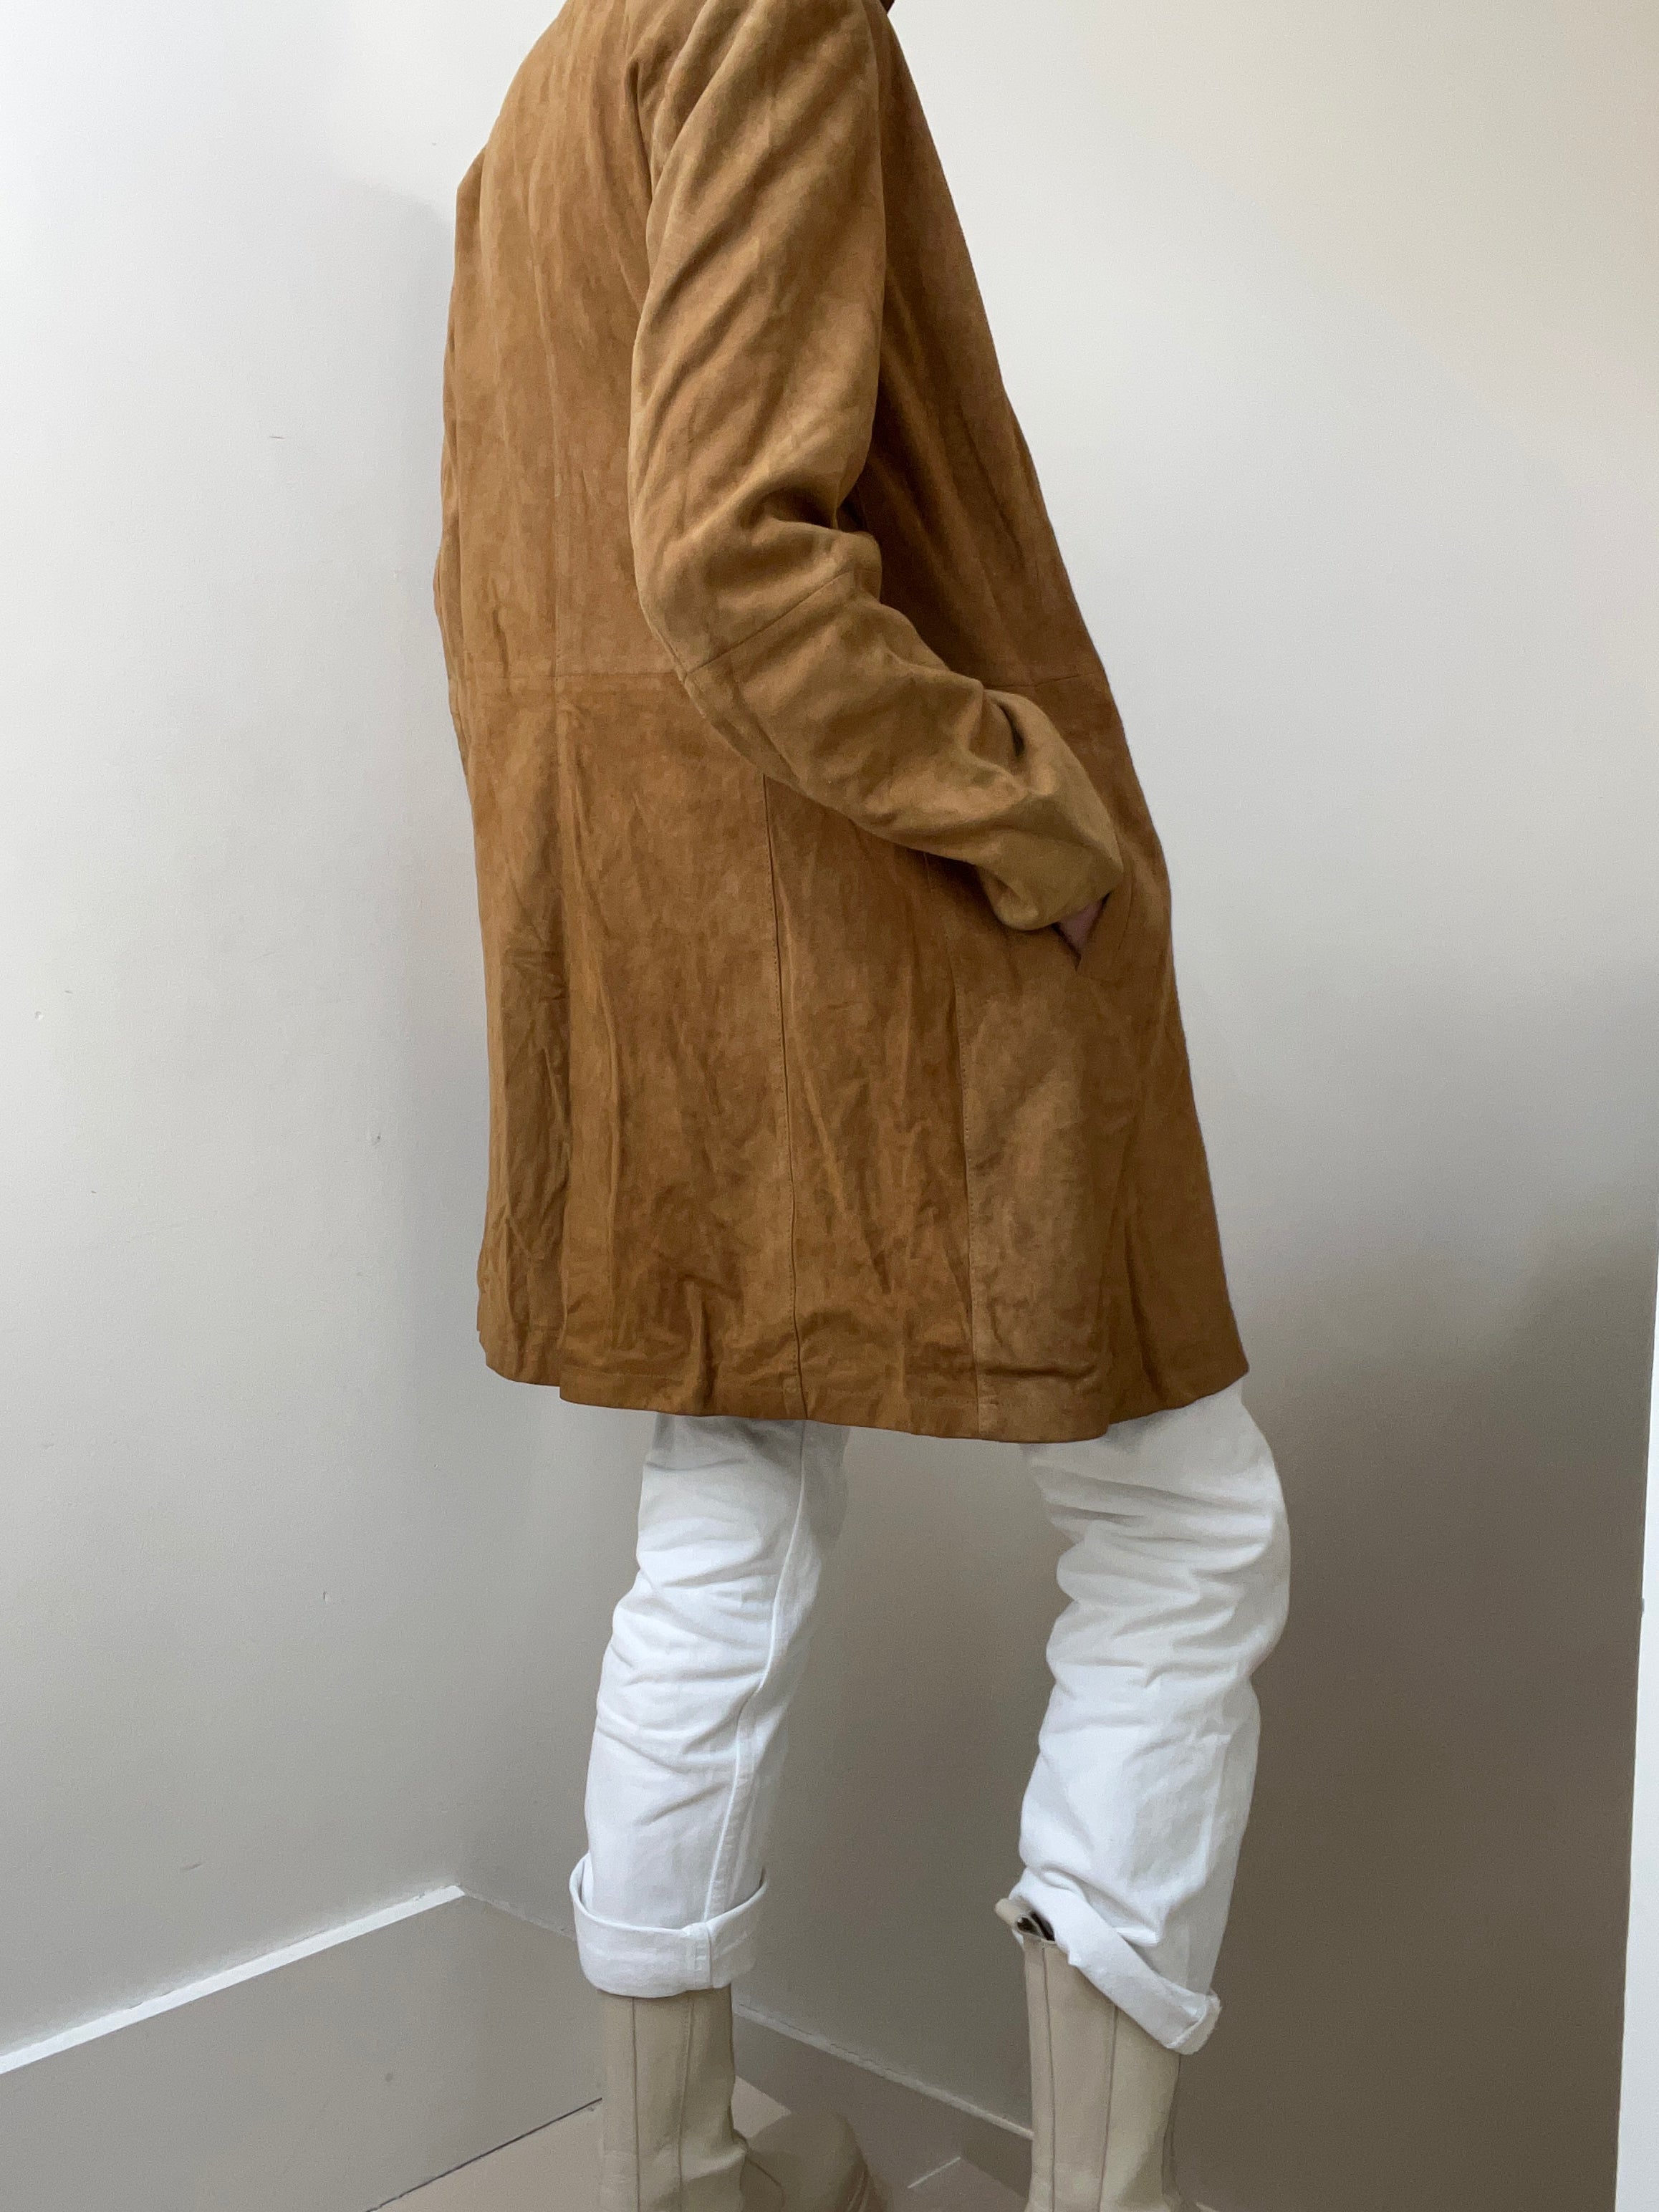 Not specified Jackets Medium Tan Suede Jacket Woven Buttons